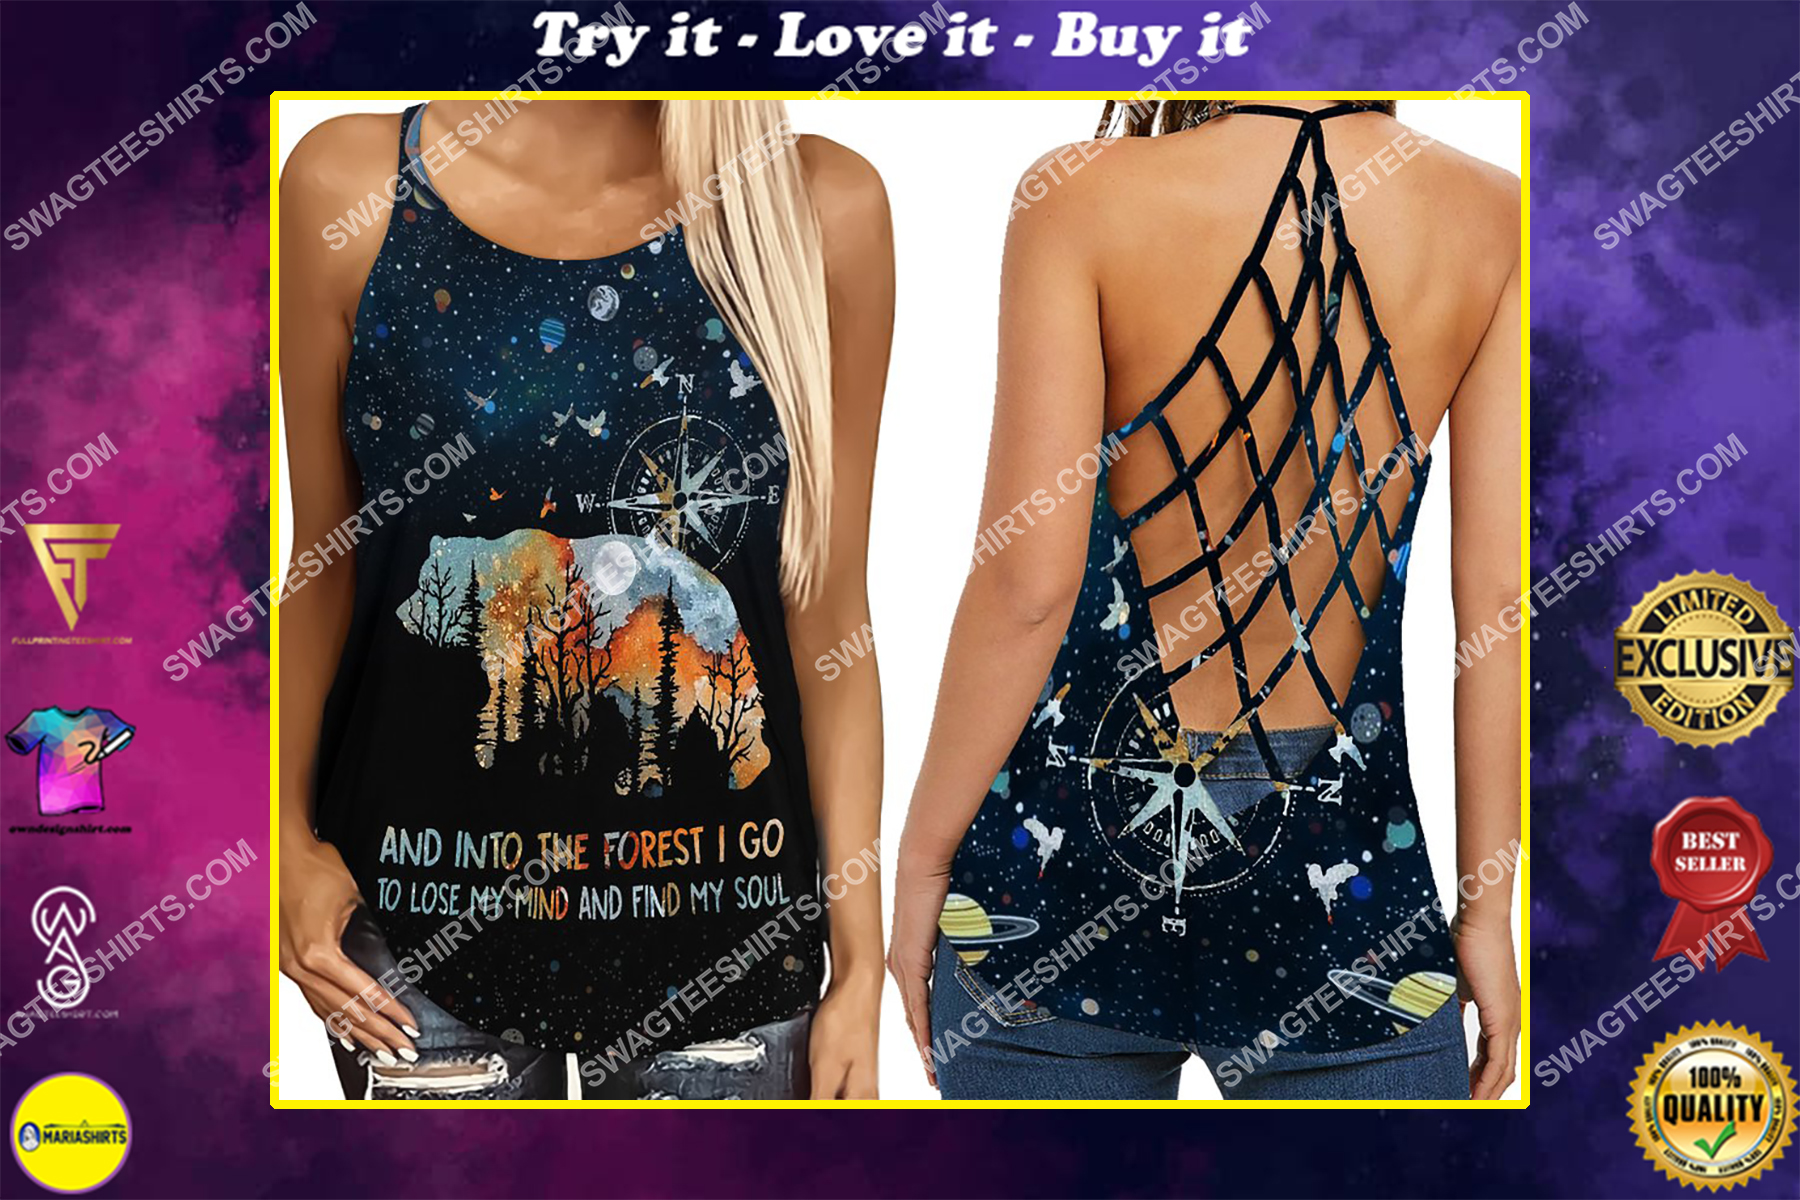 camping bear into the forest full print criss-cross tank top